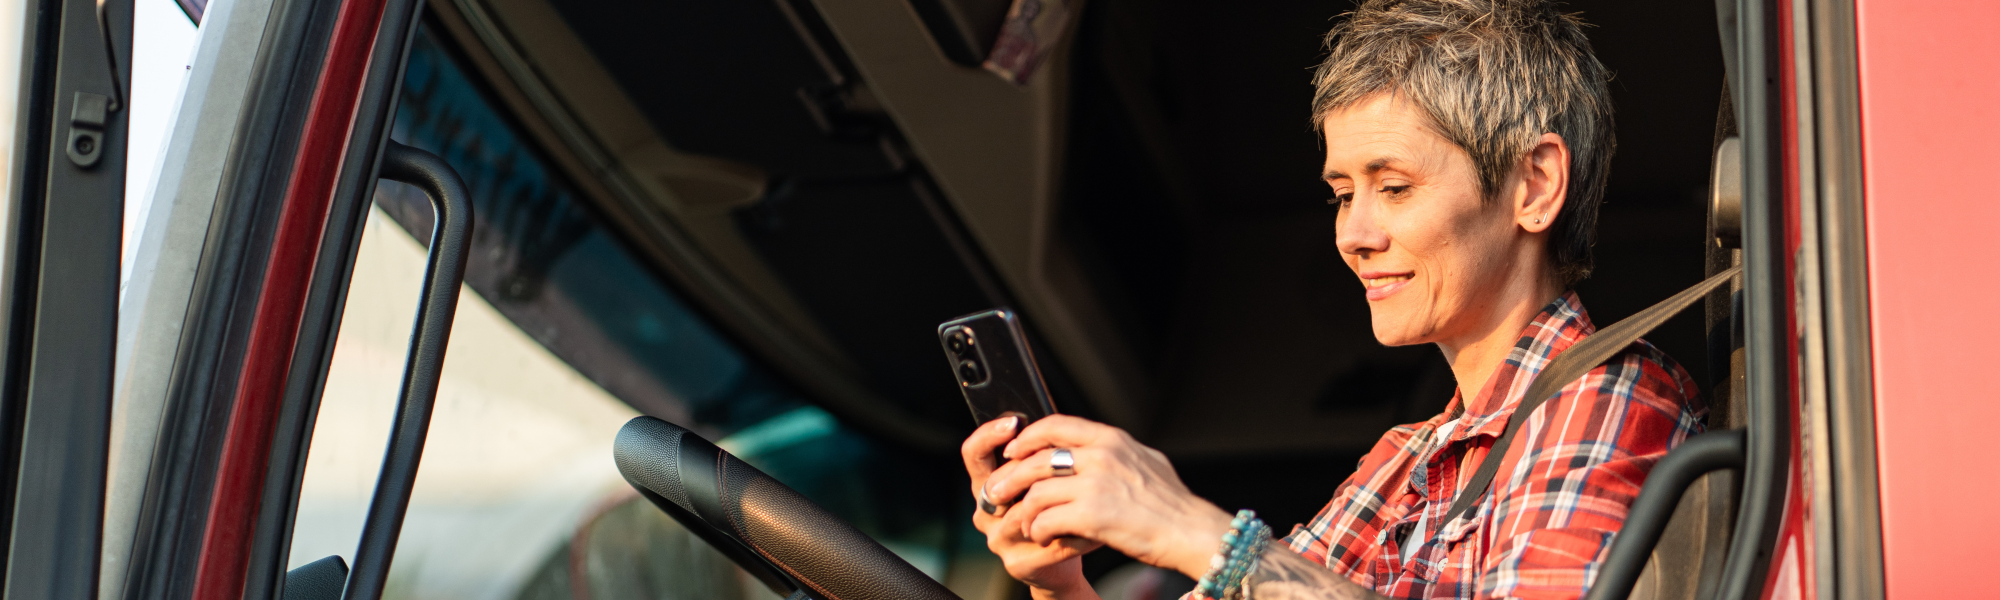 Being a truck driver can be challenging. Truckfly’s CEO, Stéphane Rabiller, explains how its app is improving the daily lives of over 330,000 truck drivers.